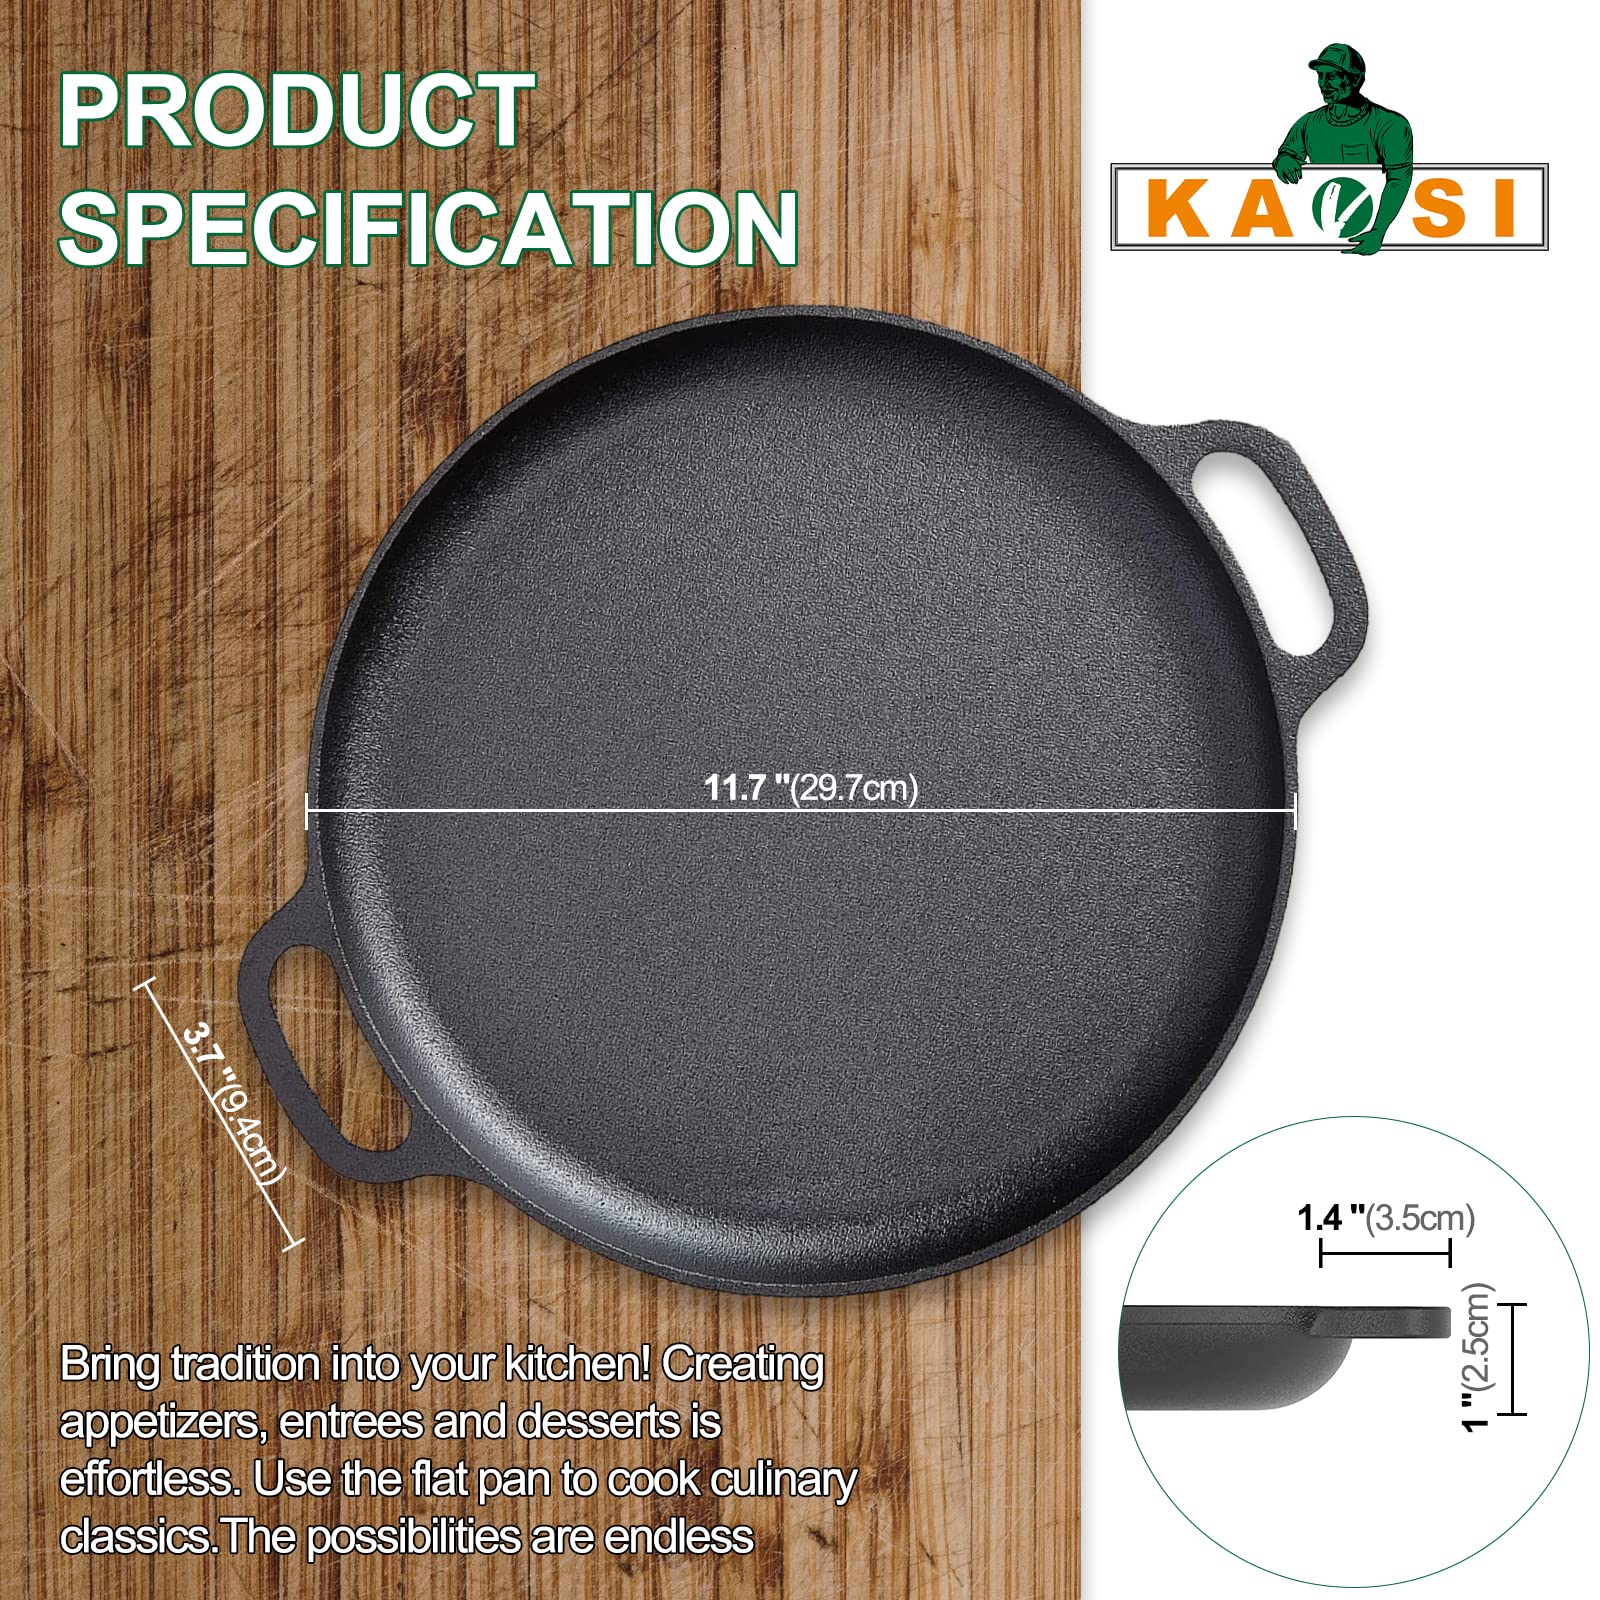 KAVSI Cast Iron Pan, Pizza Pan with Dual Handle, Baking Pan, Cast Iron Skillets for Cooktop, Oven, BBQ-12 Inch Pizza Cooker with 7 Pcs Accessories